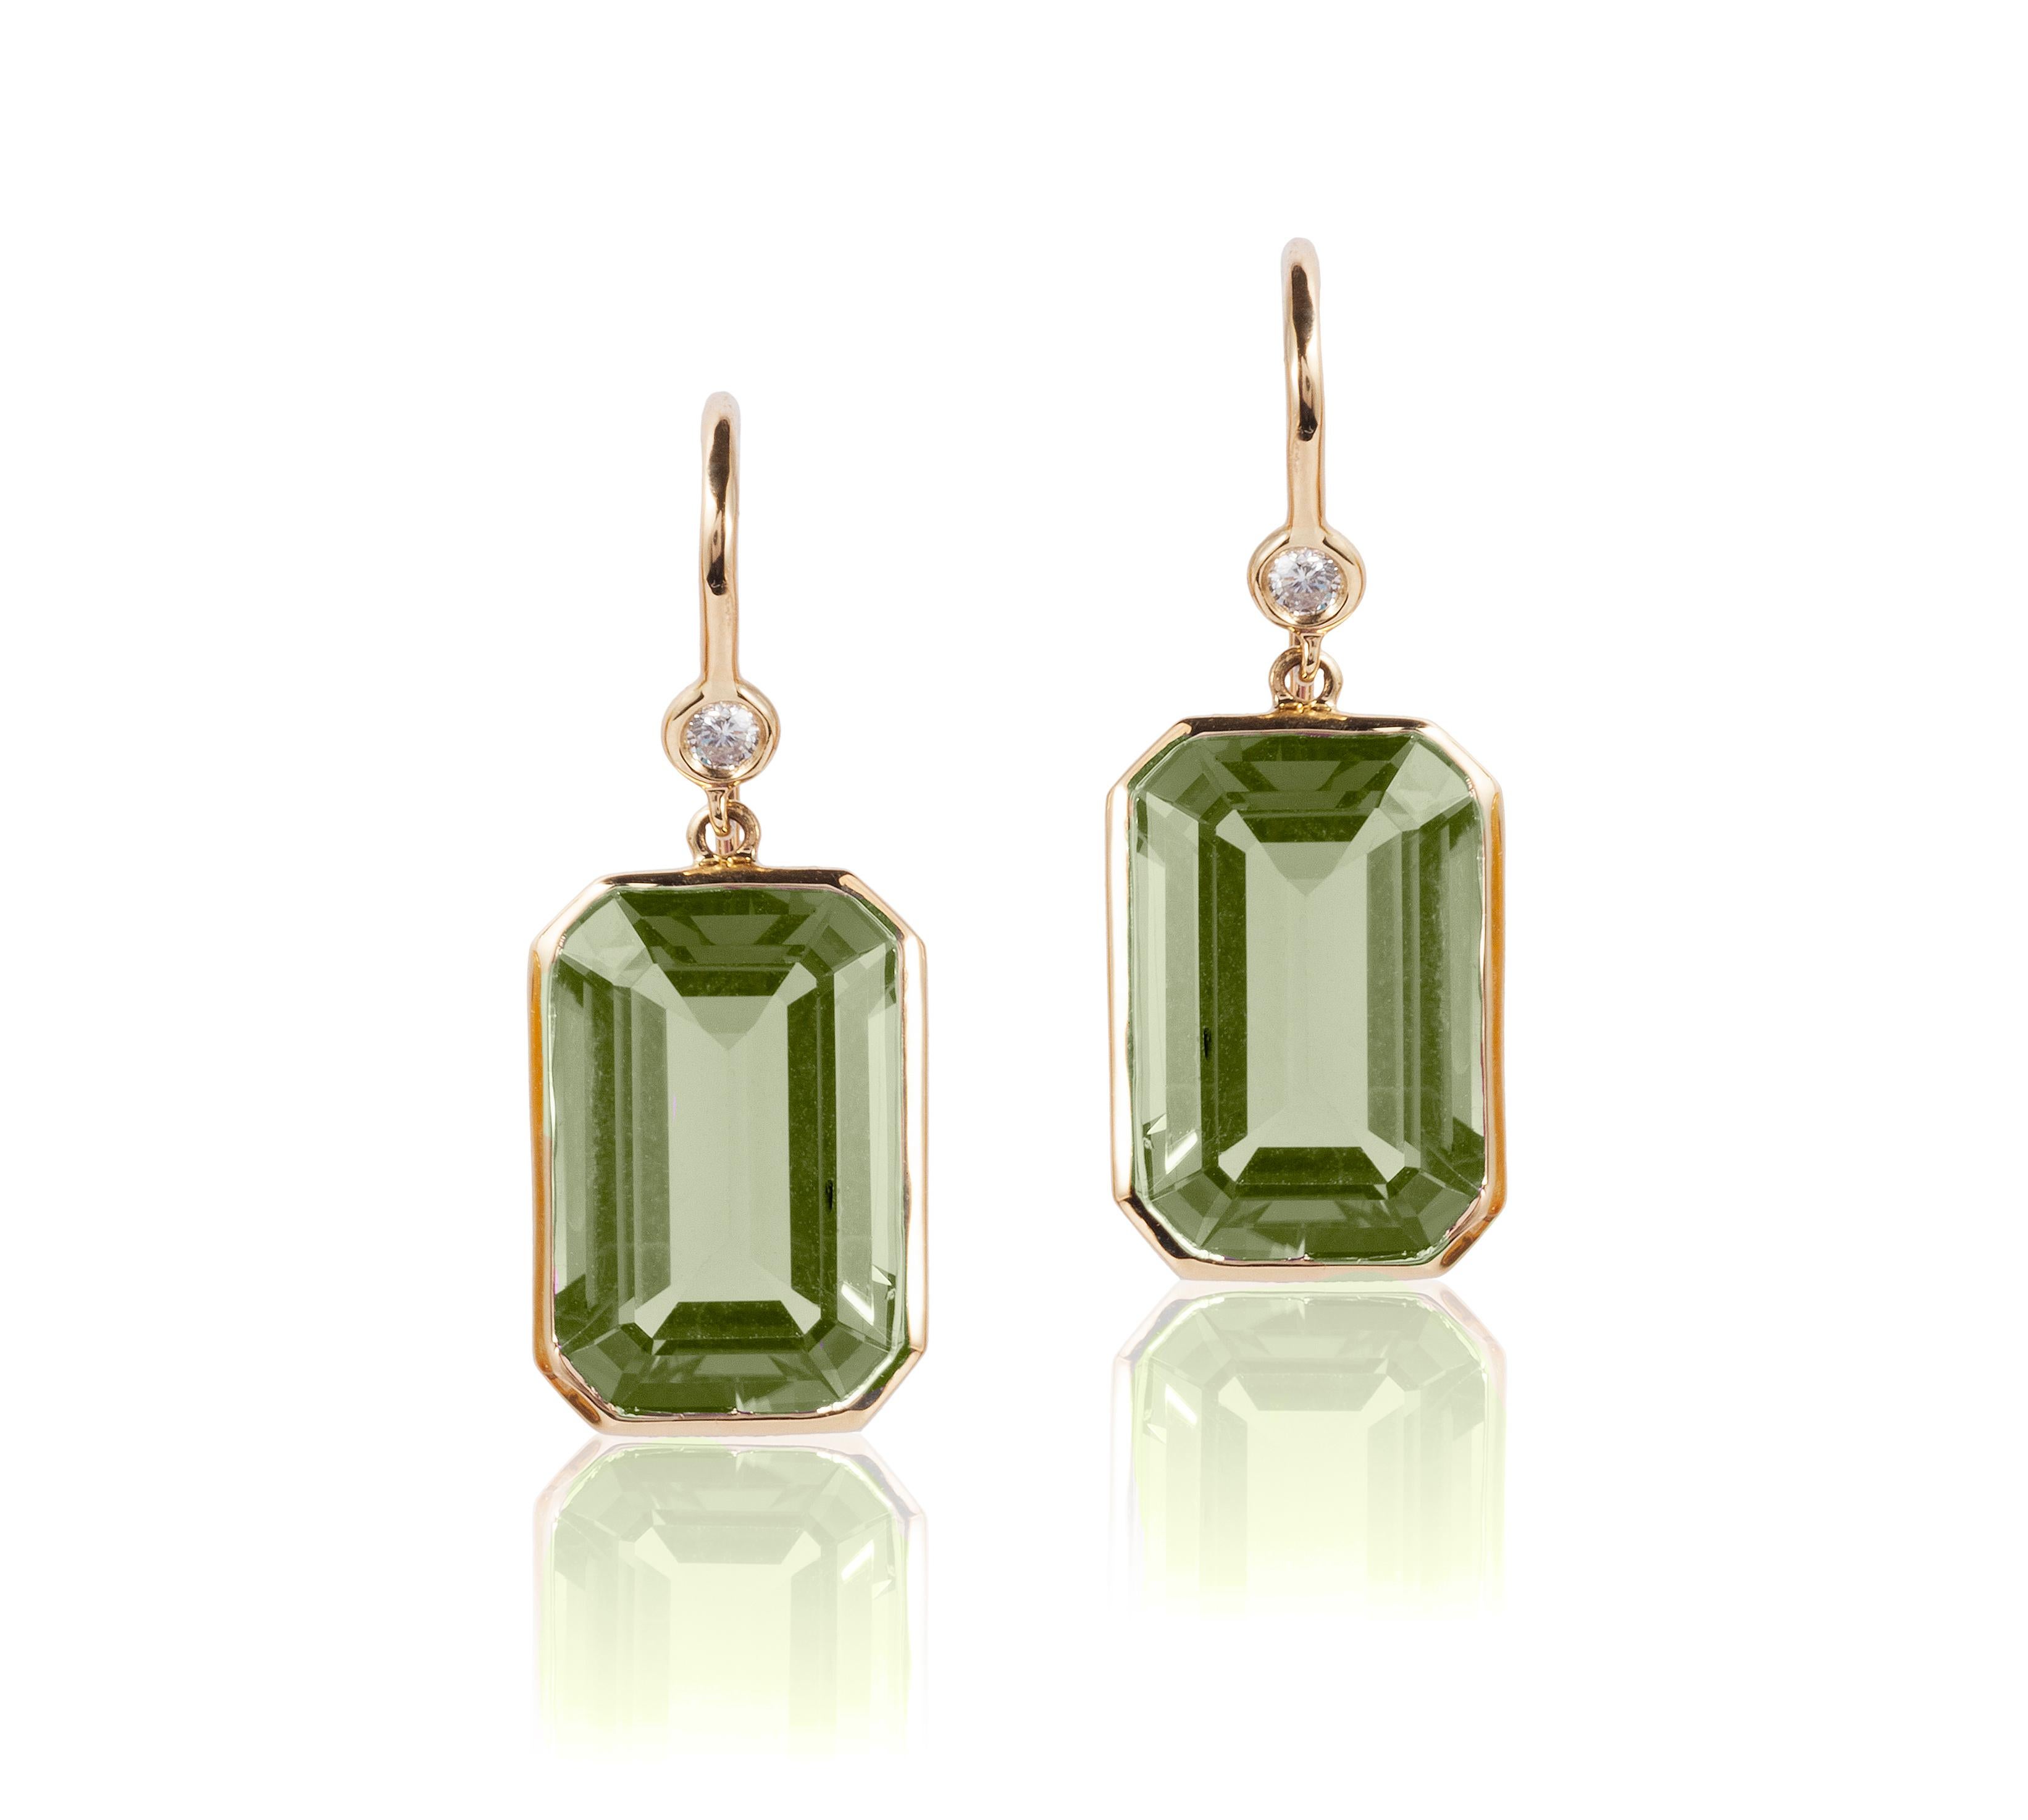 Prasiolite Emerald Cut & Diamond Earrings on Wire in 18K Yellow Gold from 'Gossip' Collection

Stone Size: 15 x 10 mm 

Diamonds: G-H / VS, Approx Wt: 0.09 Cts